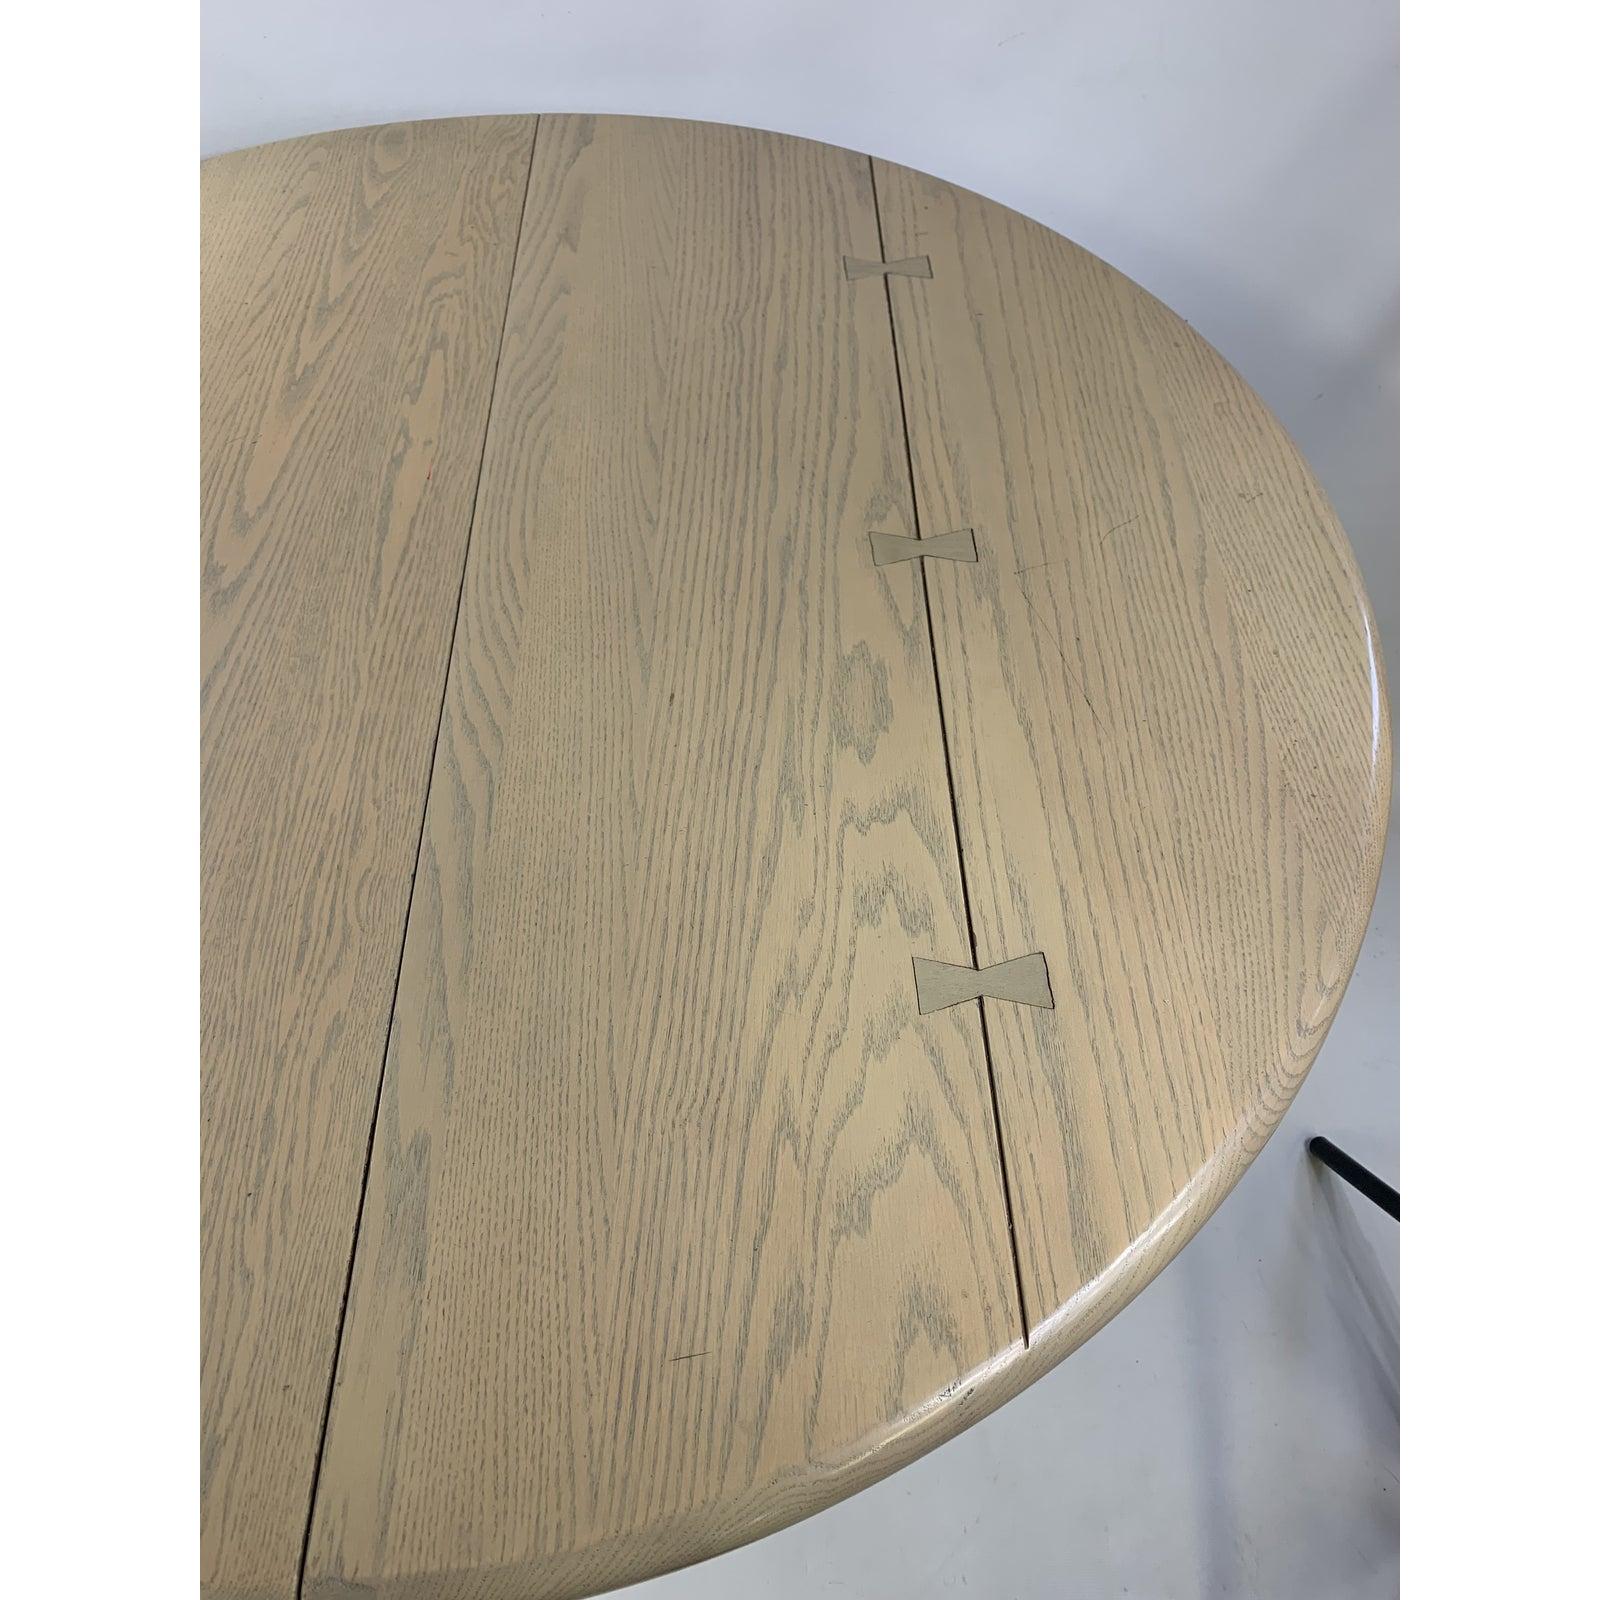 Very nice solid oak mid-century Conant Ball round pedestal table. Table also comes with 2 leaves. Please see the pictures for added description.